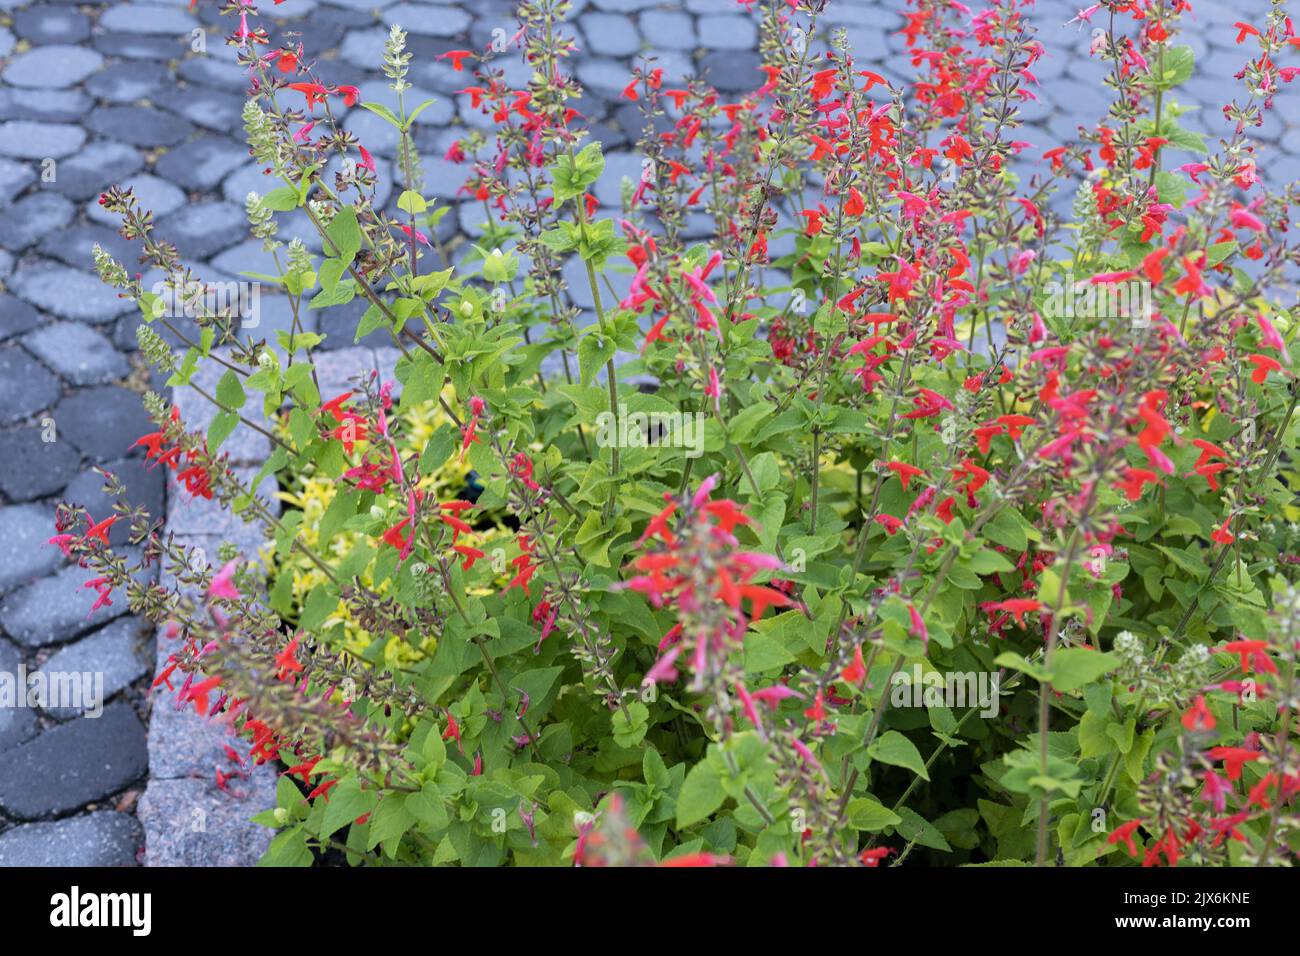 Salvia coccinea 'Lady in Red' scarlet sage flowers. Stock Photo